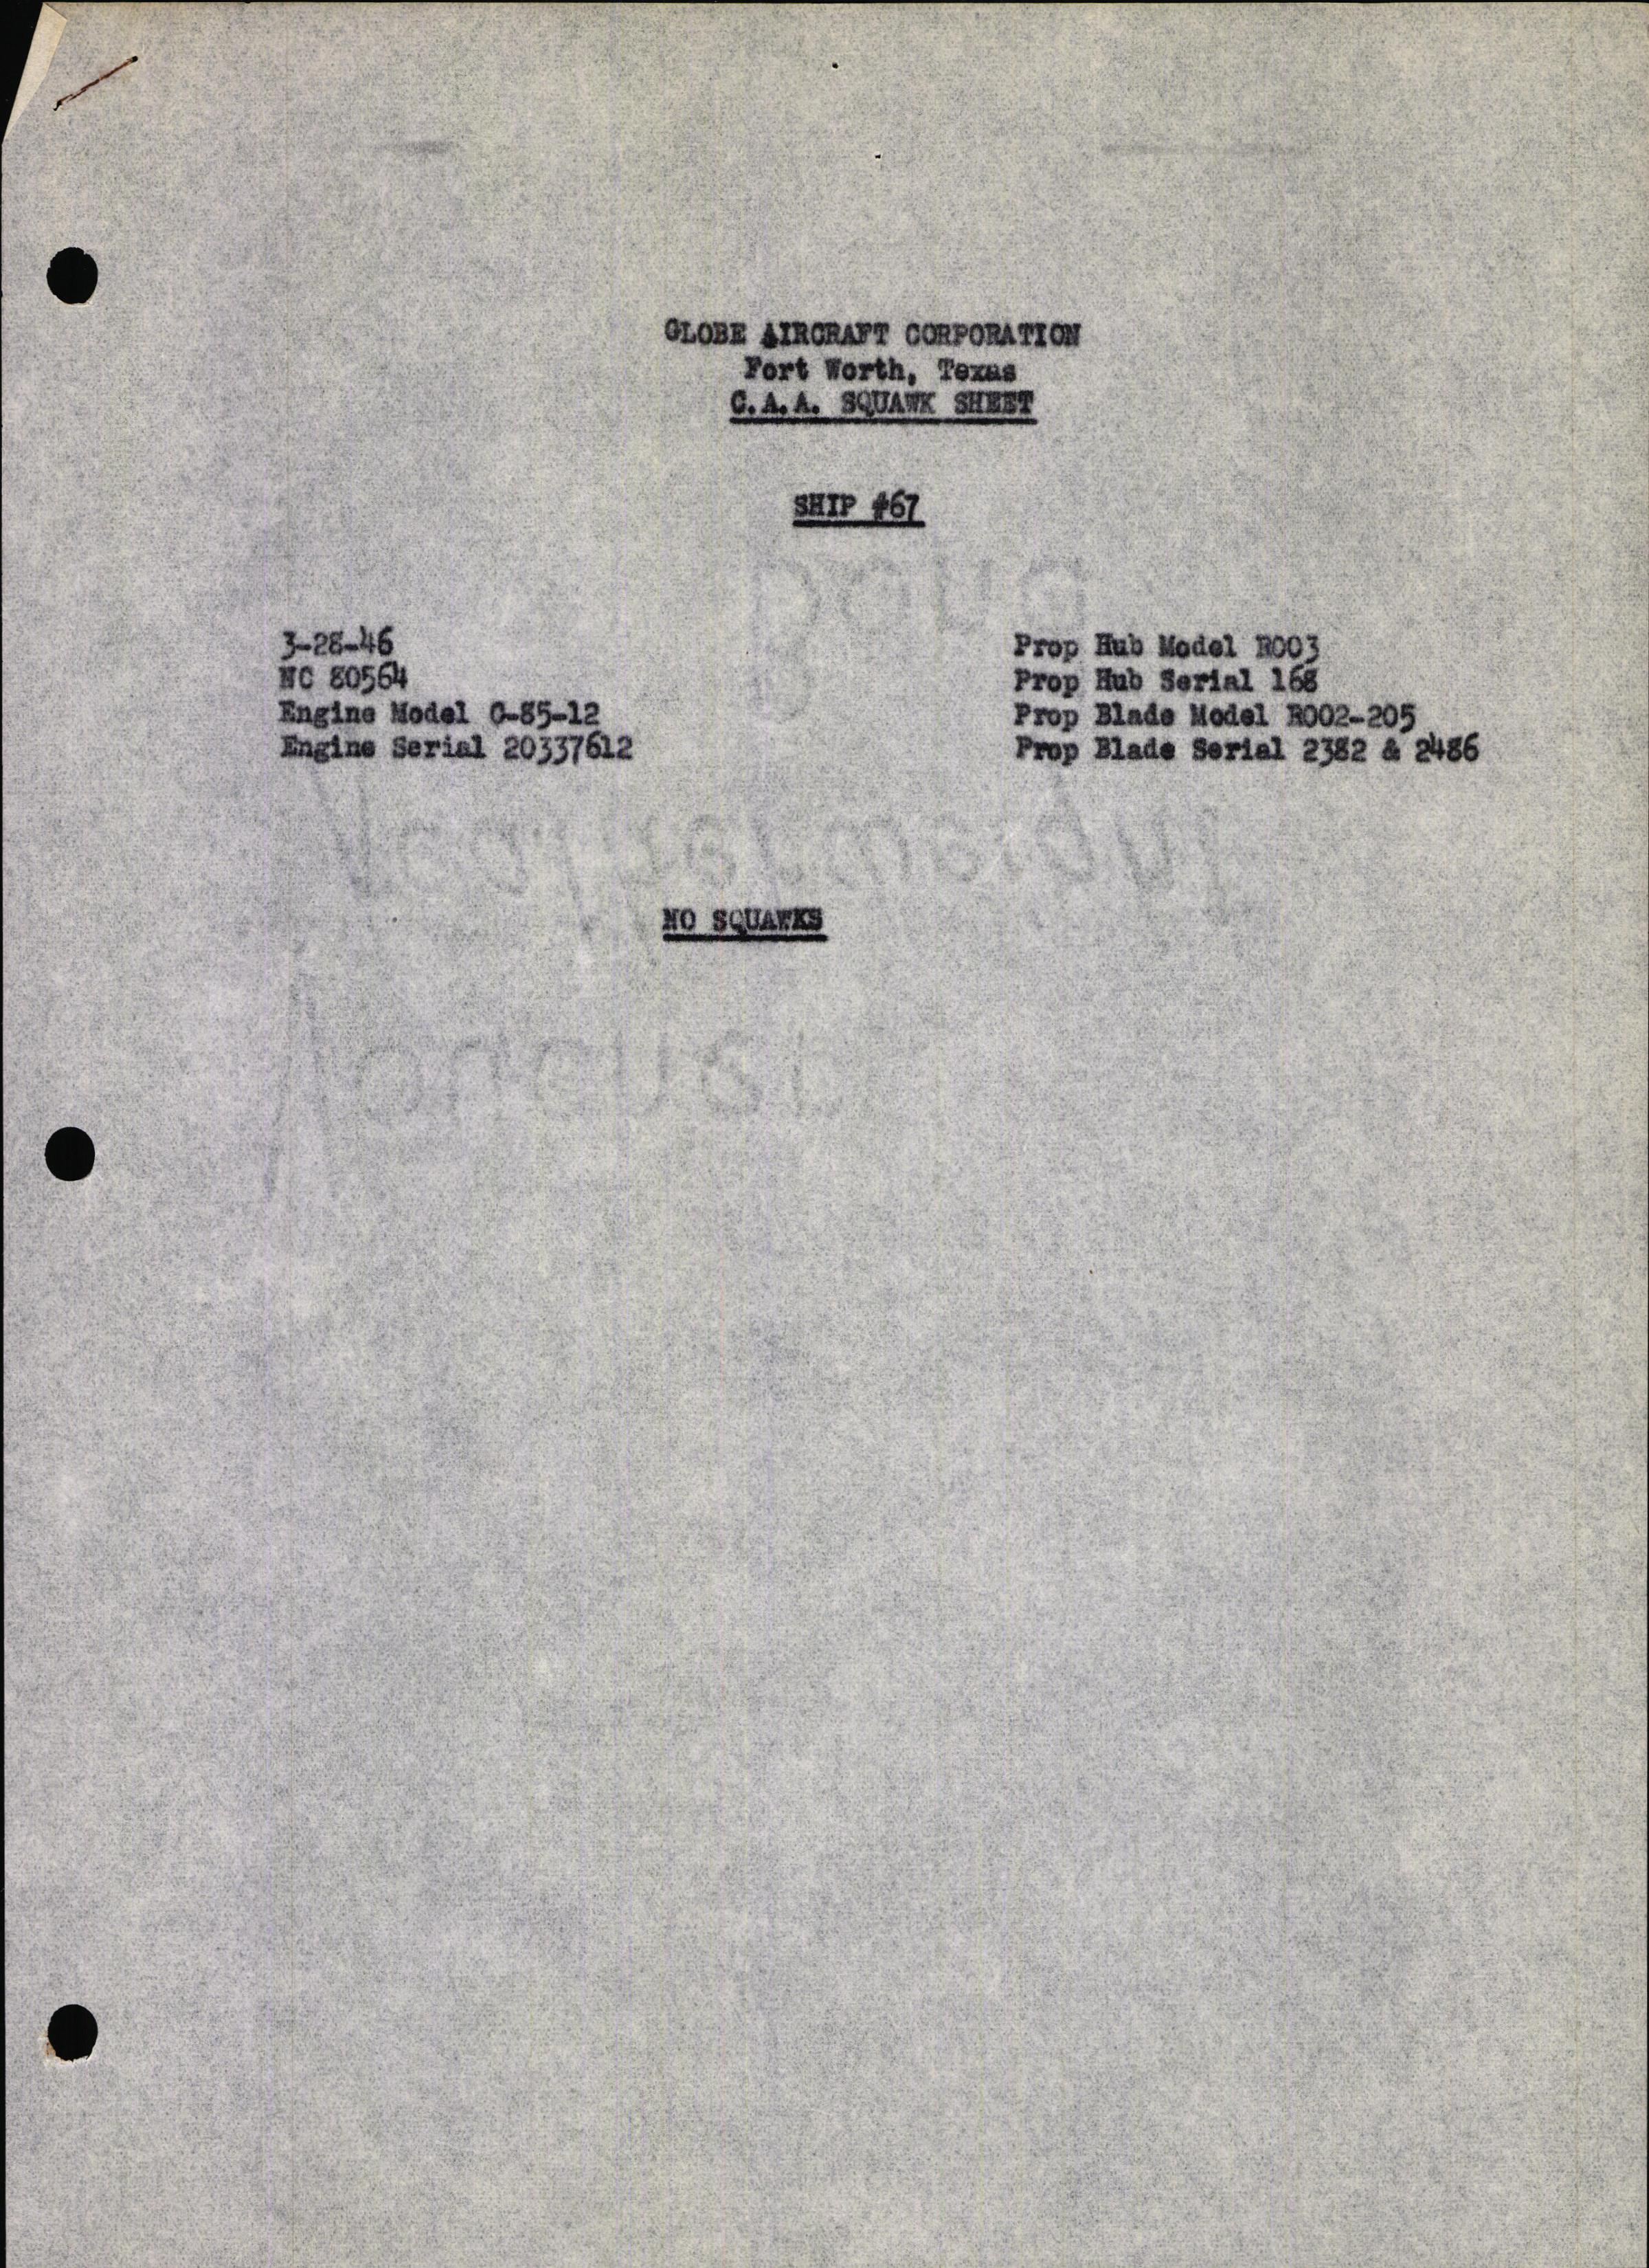 Sample page 7 from AirCorps Library document: Technical Information for Serial Number 67